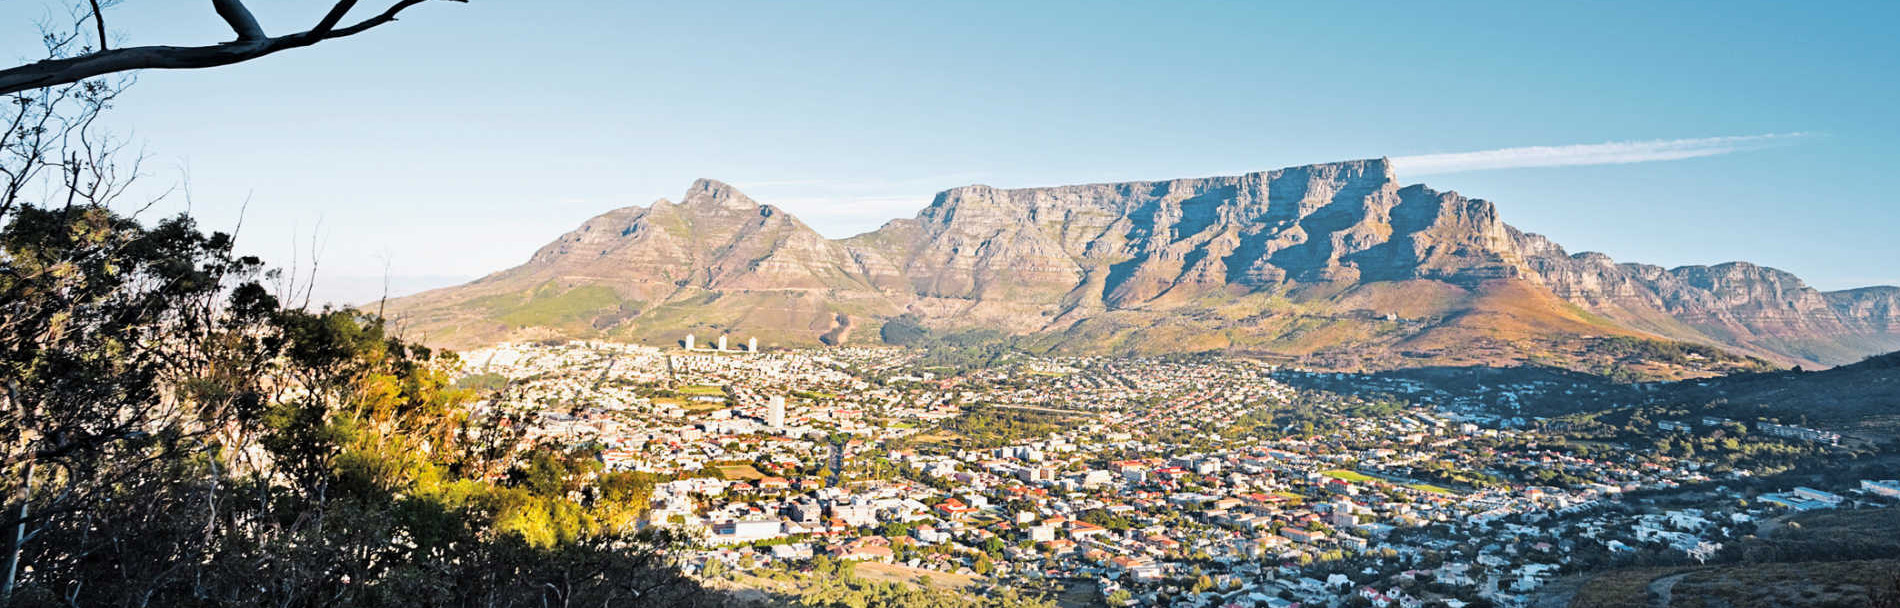 Best Of South Africa Tour Package - 9 Nights